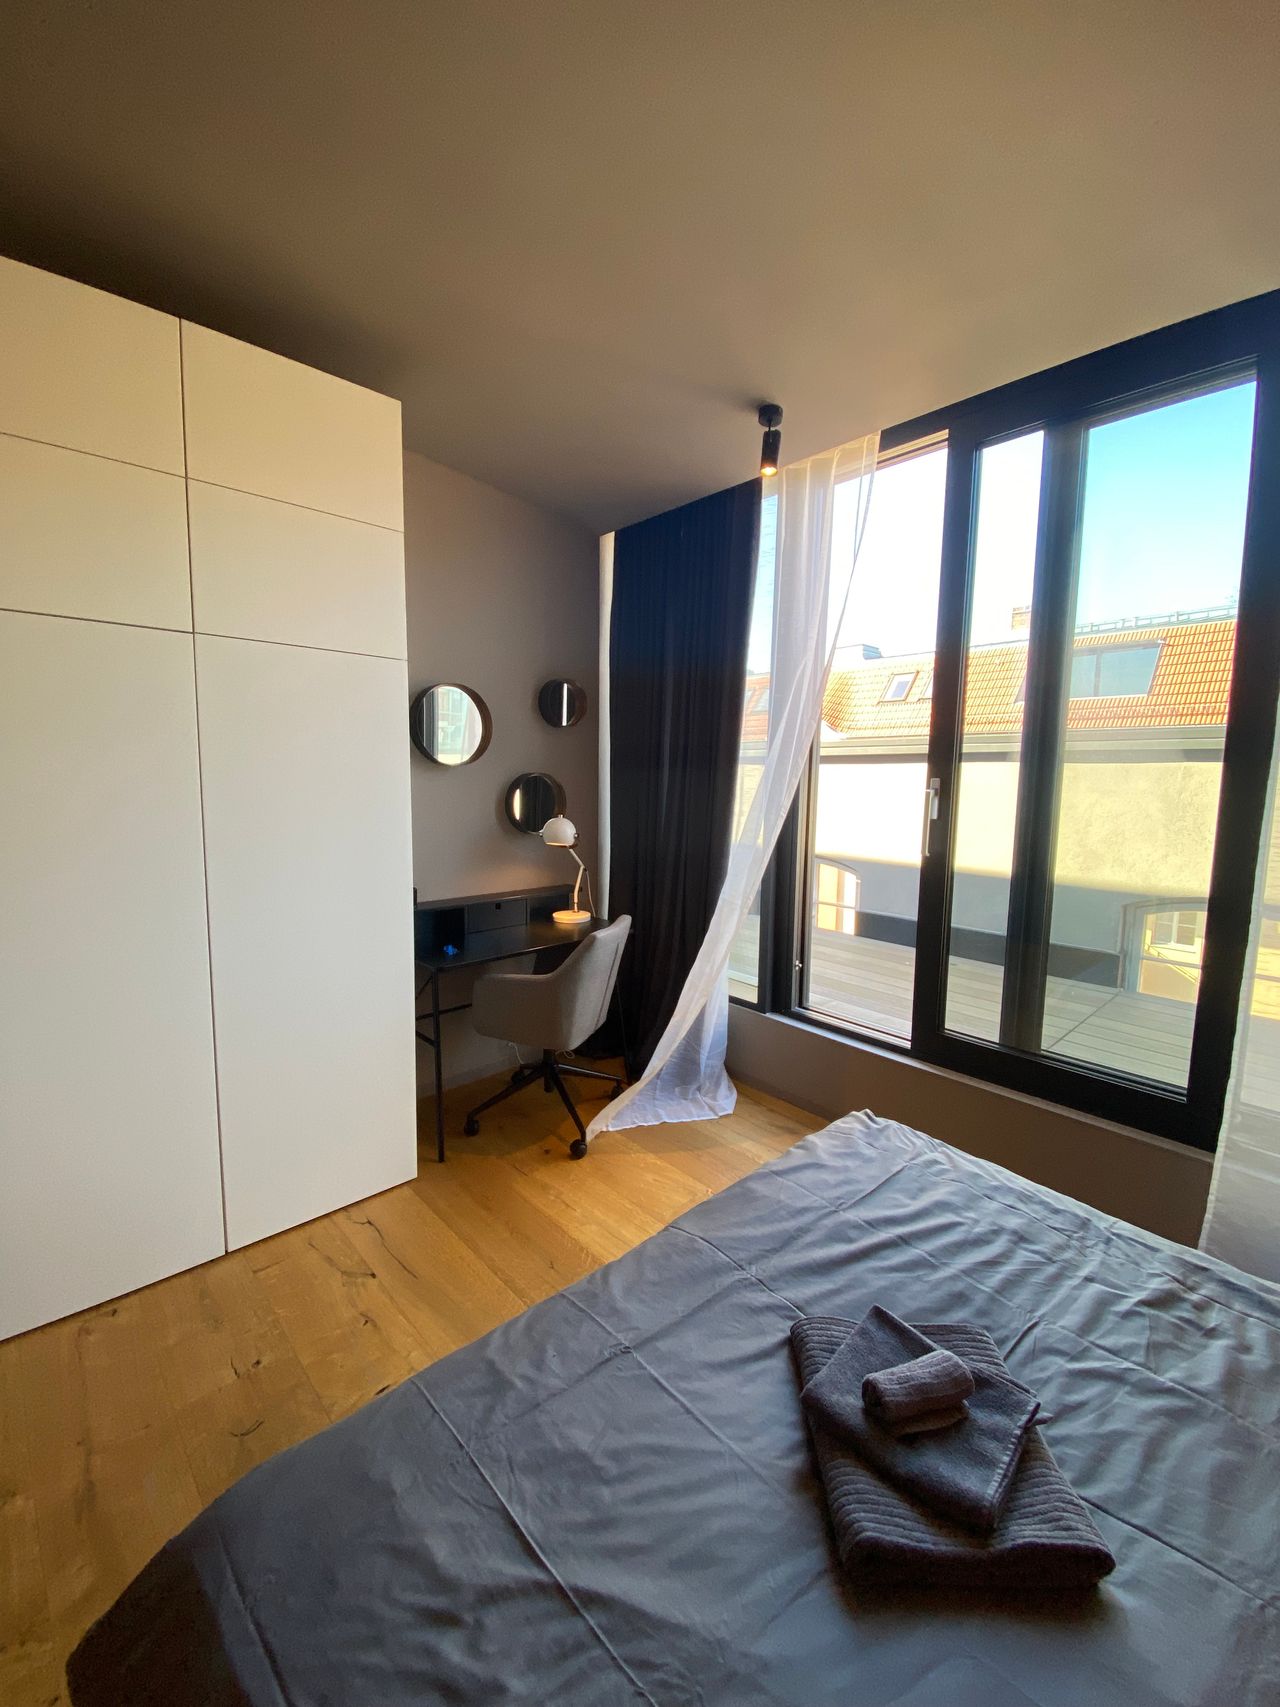 SHARED APARTMENT - Exclusive Modern Penthouse Suite in Berlin Mitte